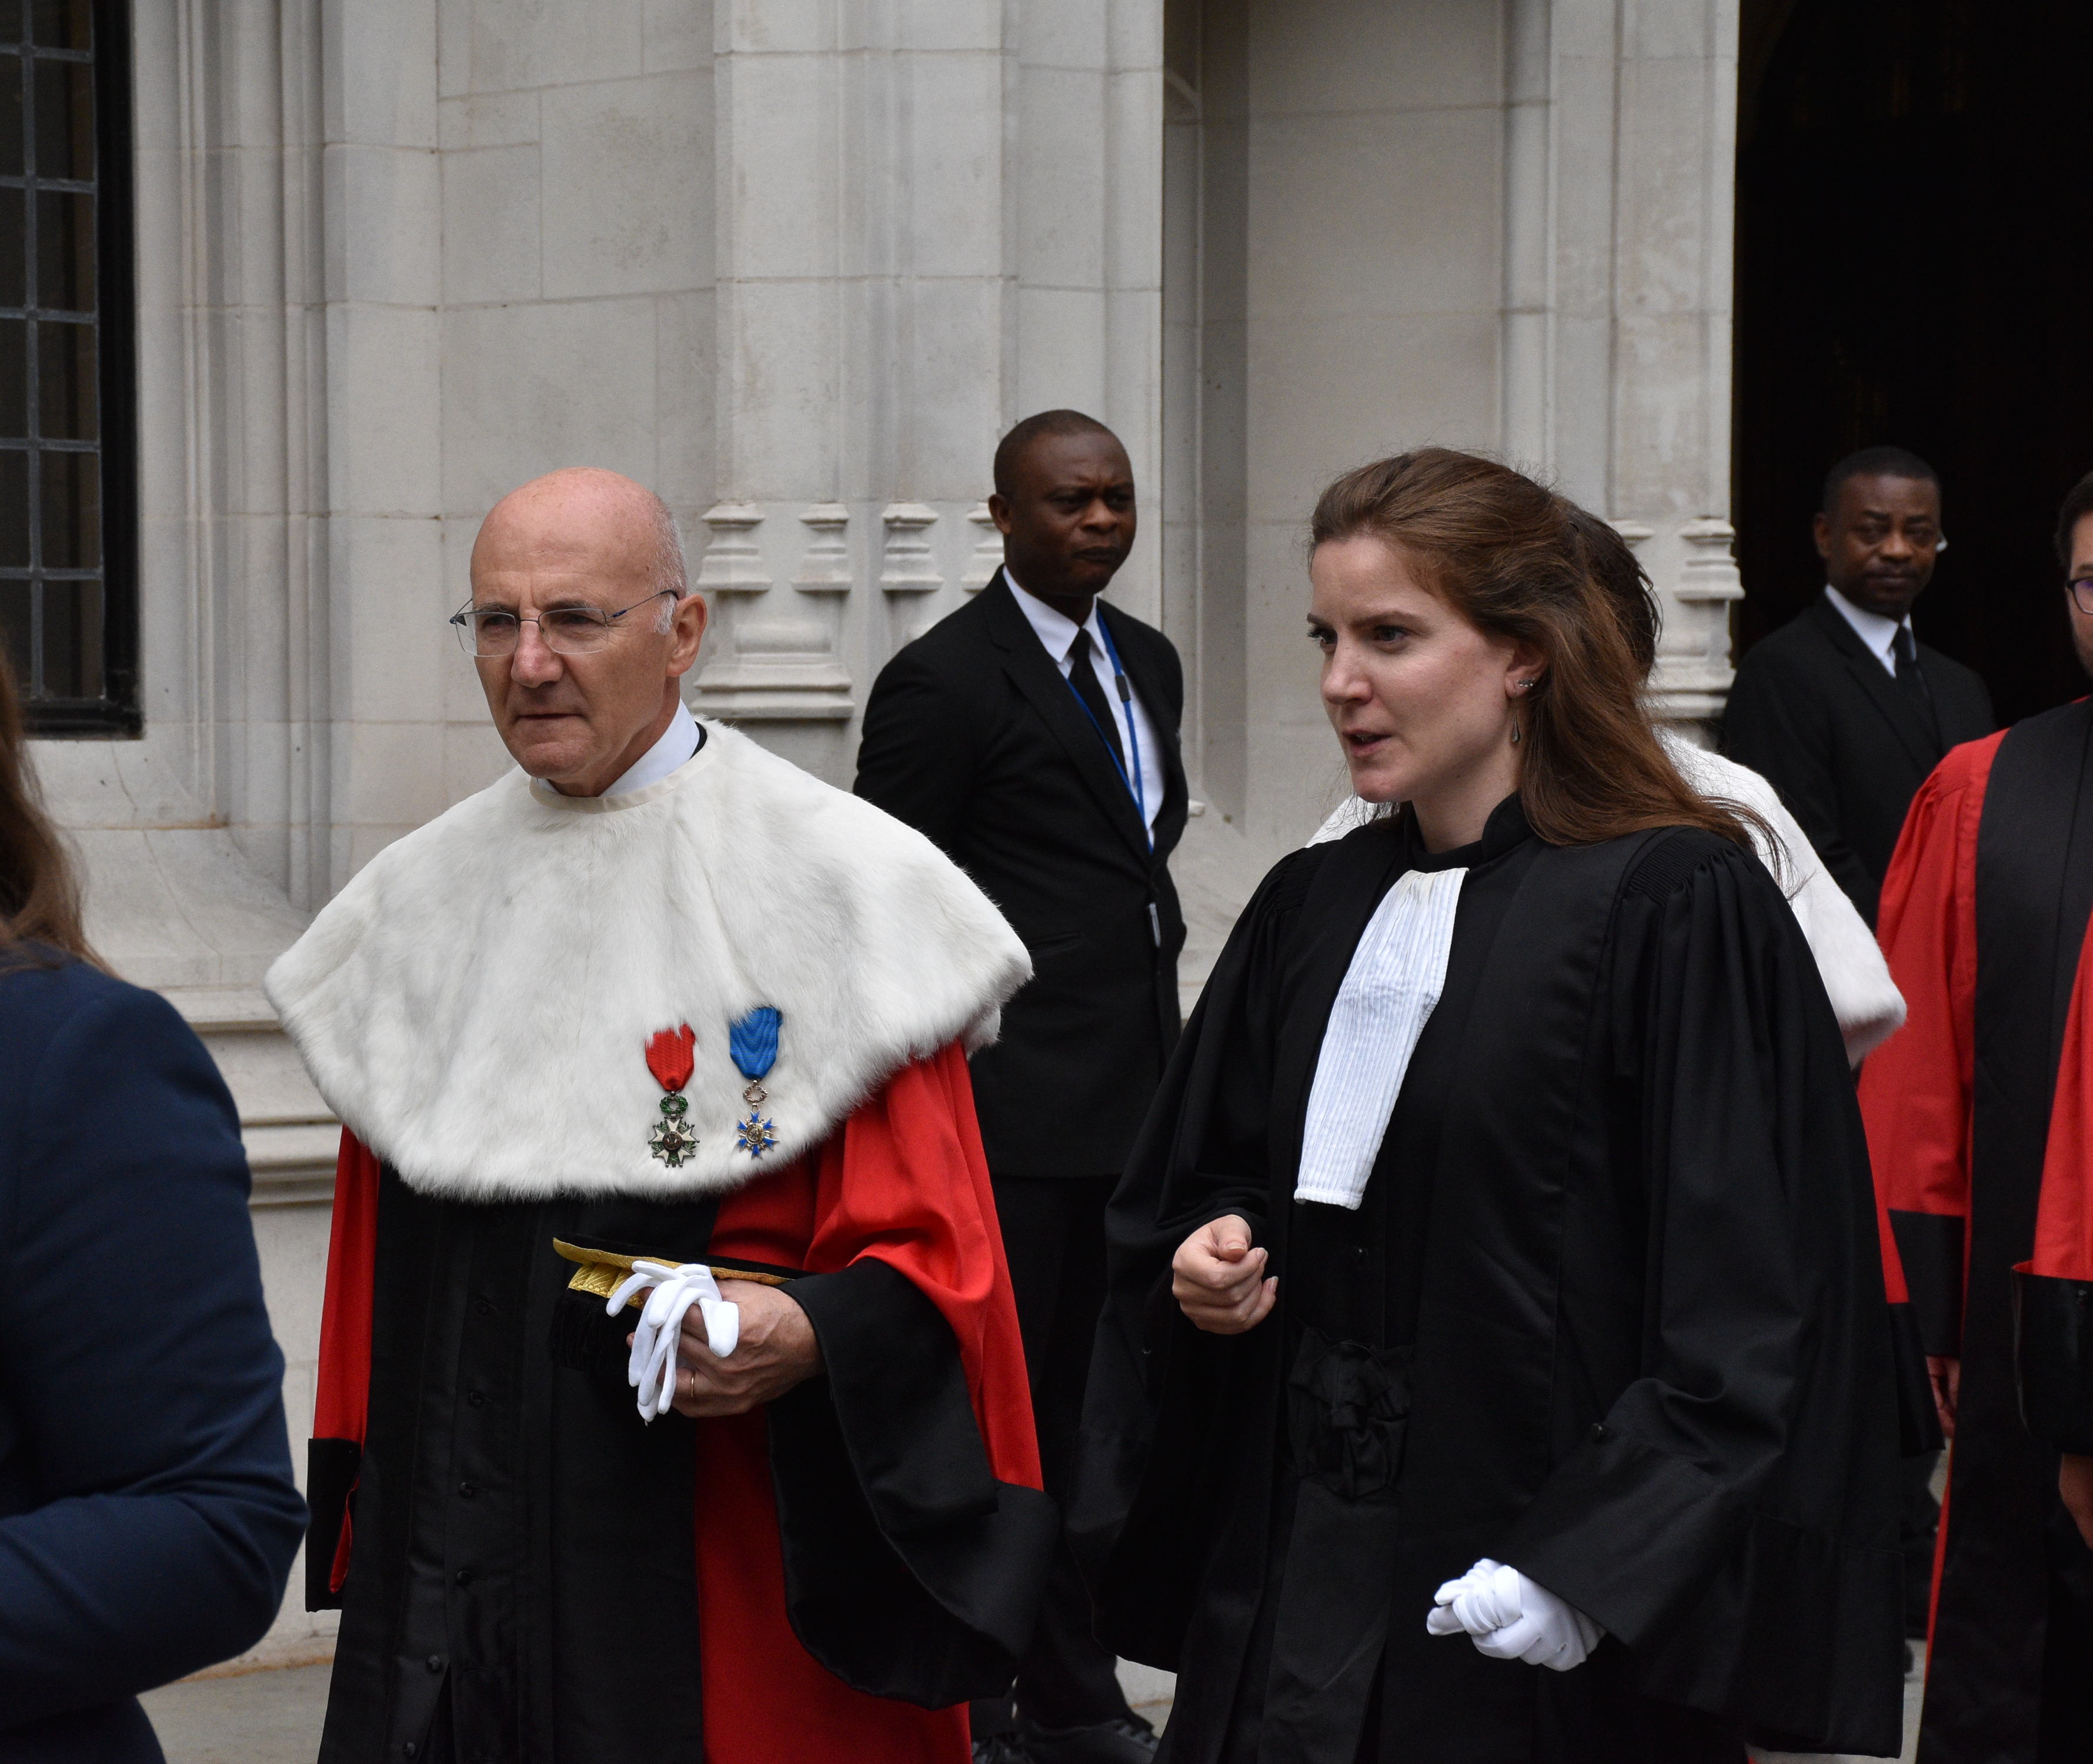 Photo of visiting judges from the Cour de cassation processing to the Opening of the Legal Year ceremony